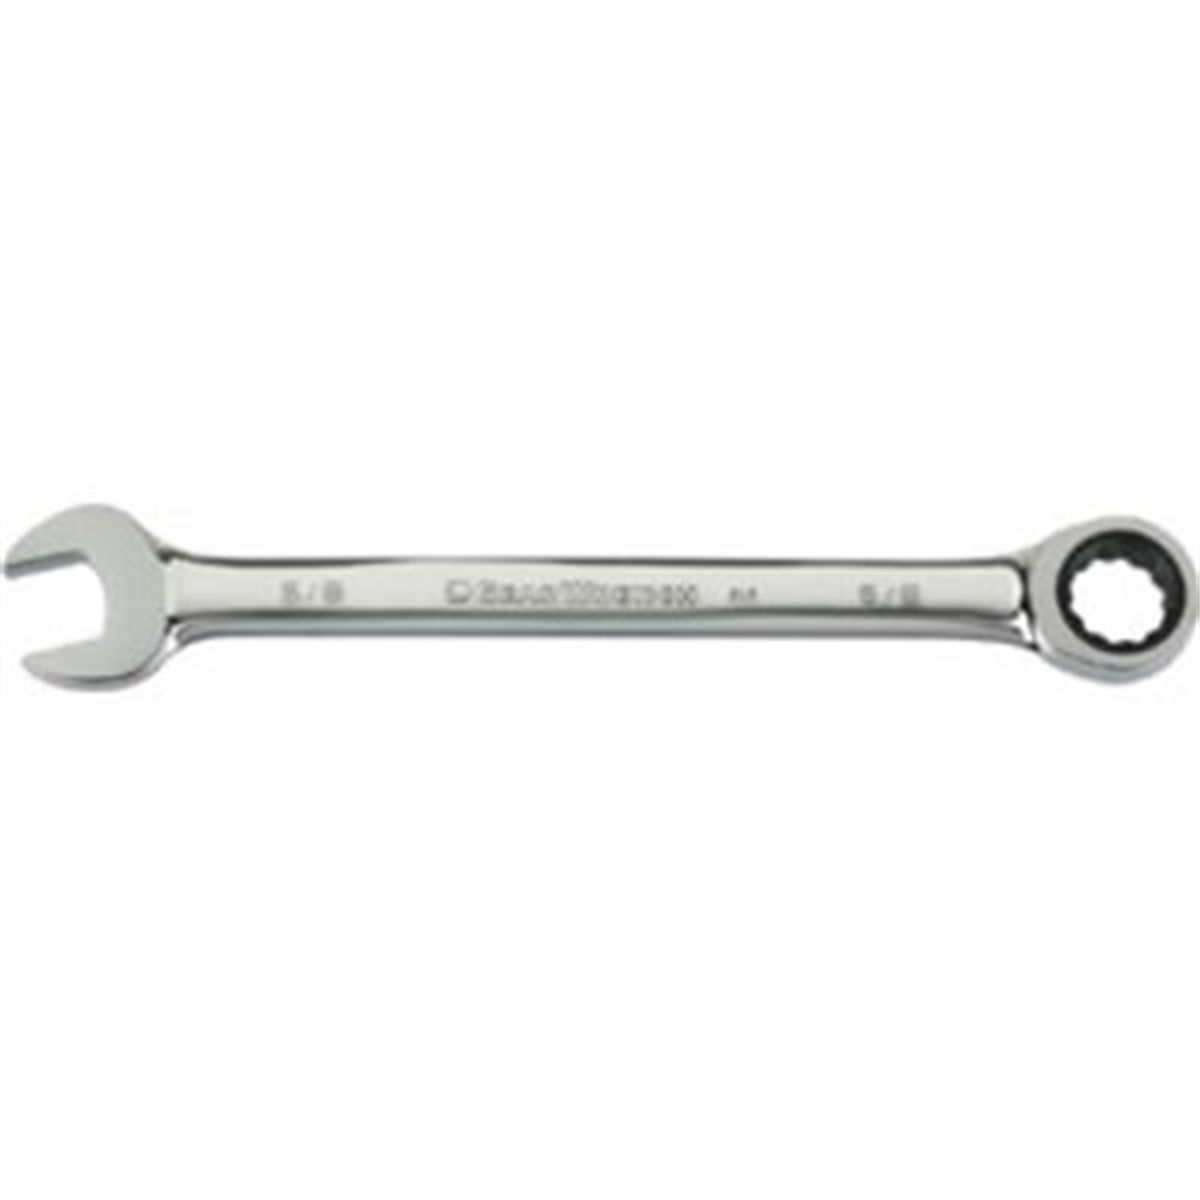 KD 9110 Ratcheting Combination Wrench - 10mm Gearwrench KDT9110